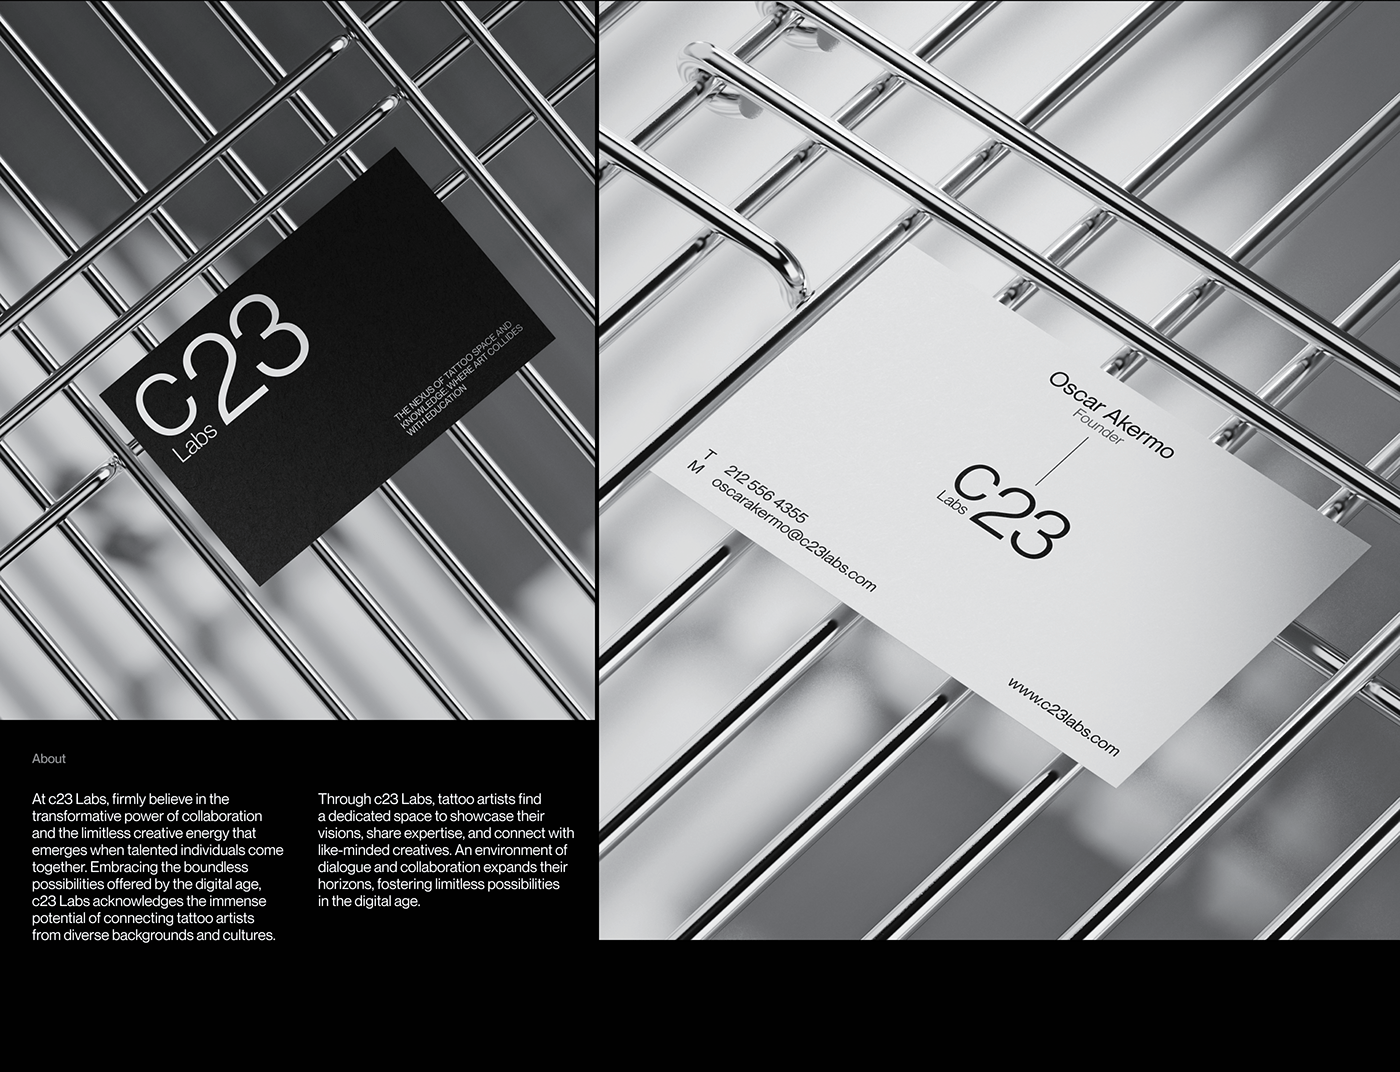 About. c23 Labs. Brand Identity.